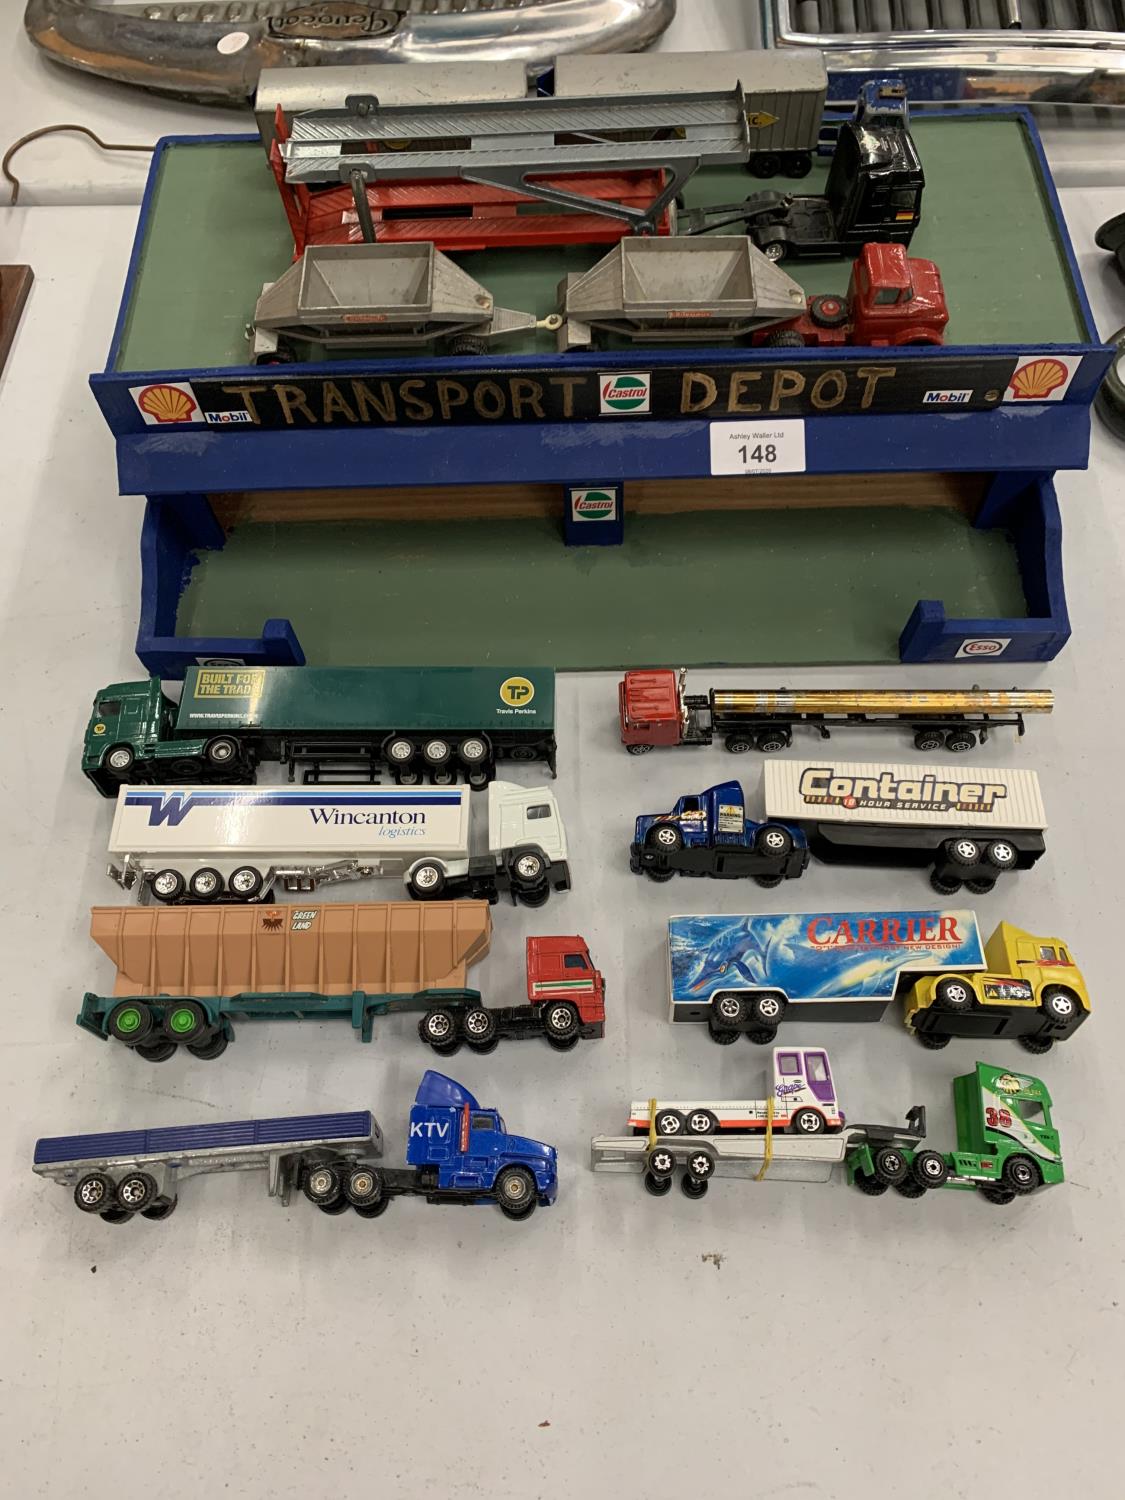 A WOODEN TOY TRANSPORT DEPOT WITH TWELVE MODEL LORRIES